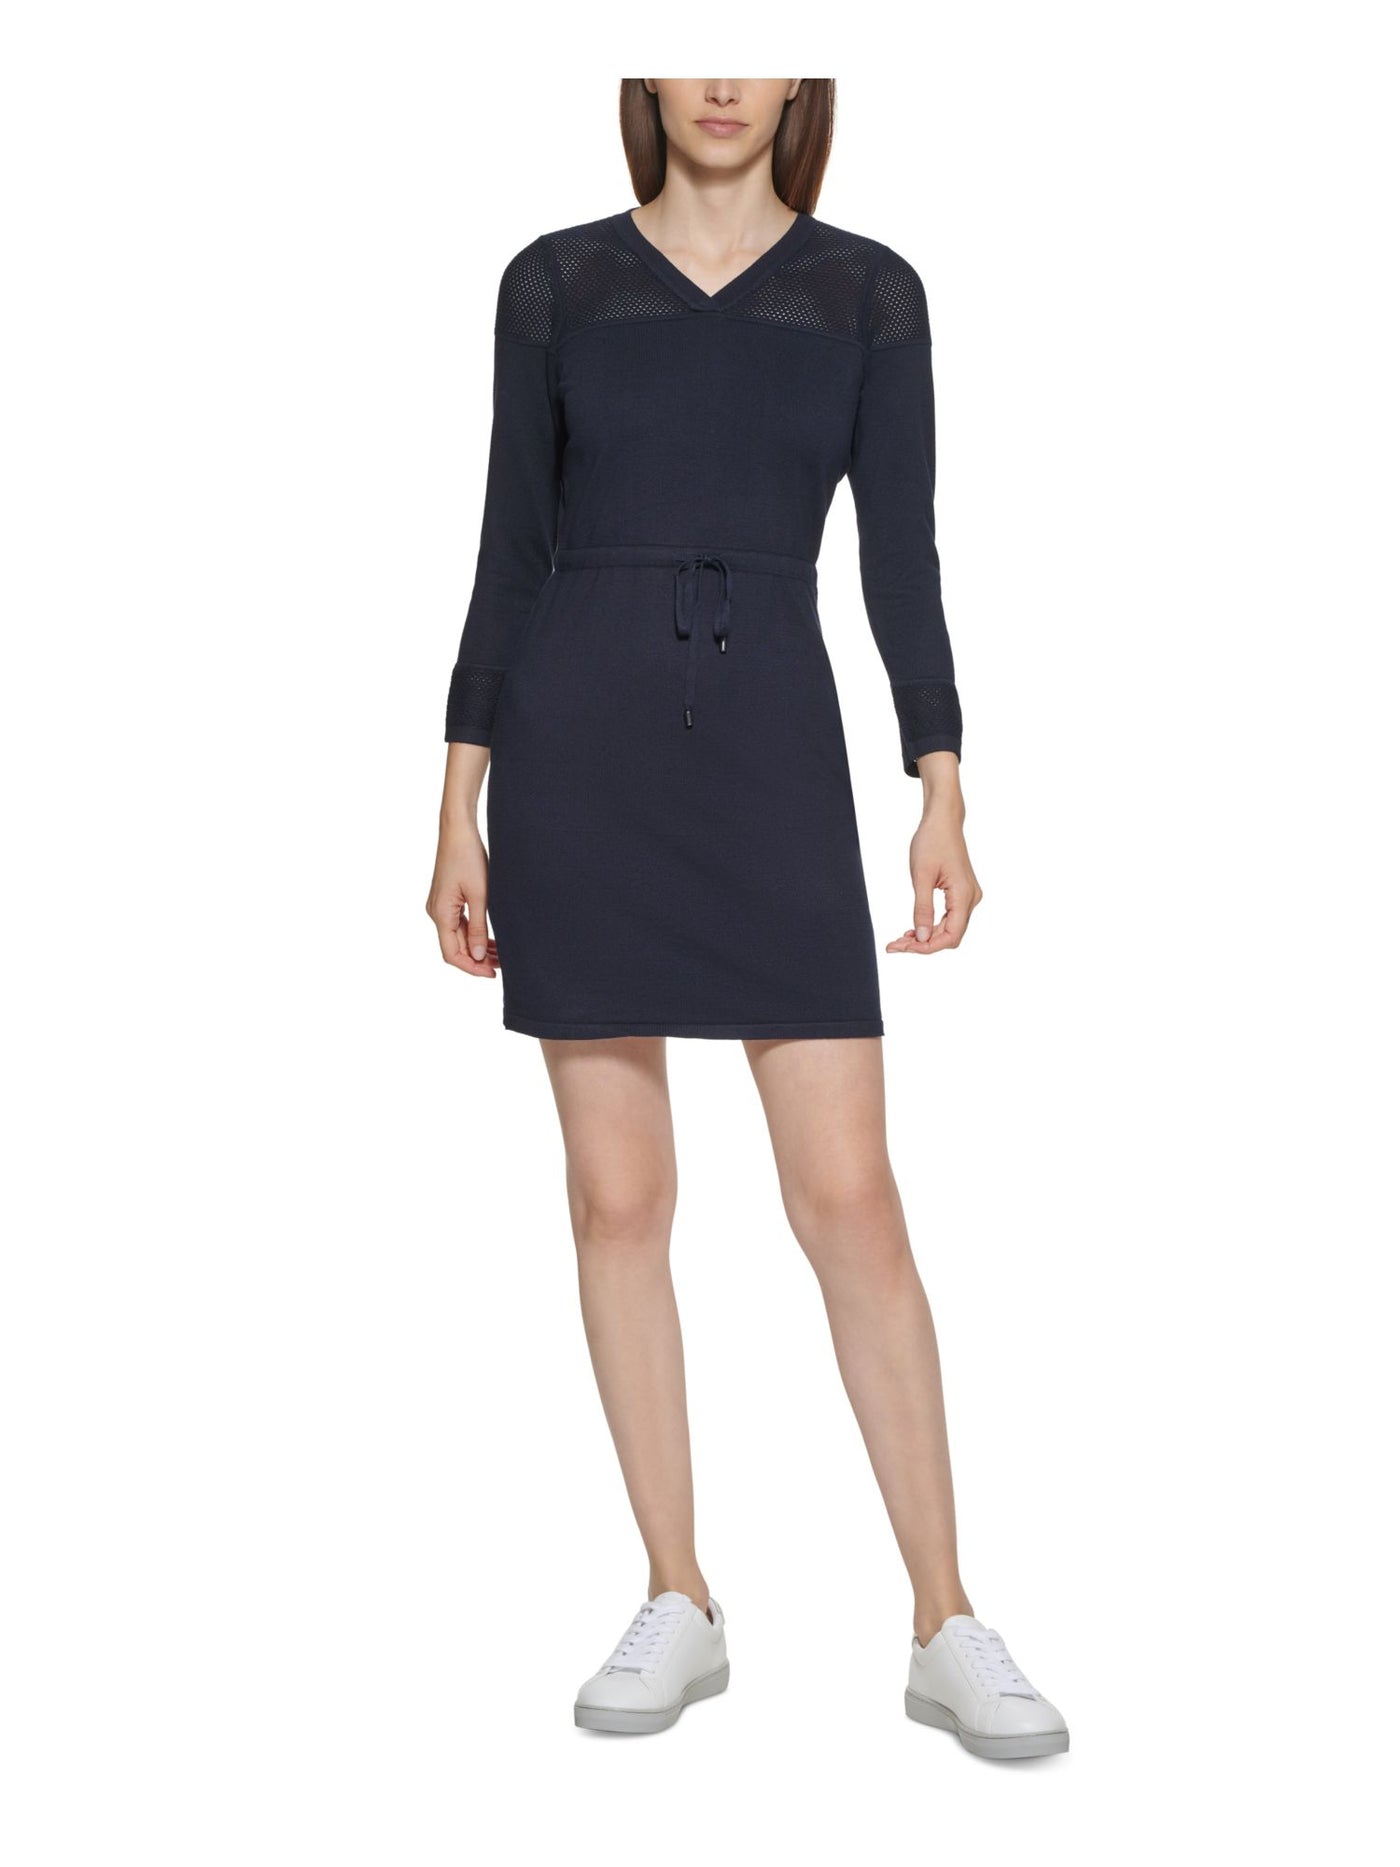 CALVIN KLEIN Womens Navy Tie Long Sleeve V Neck Above The Knee Party Shift Dress Petites PL